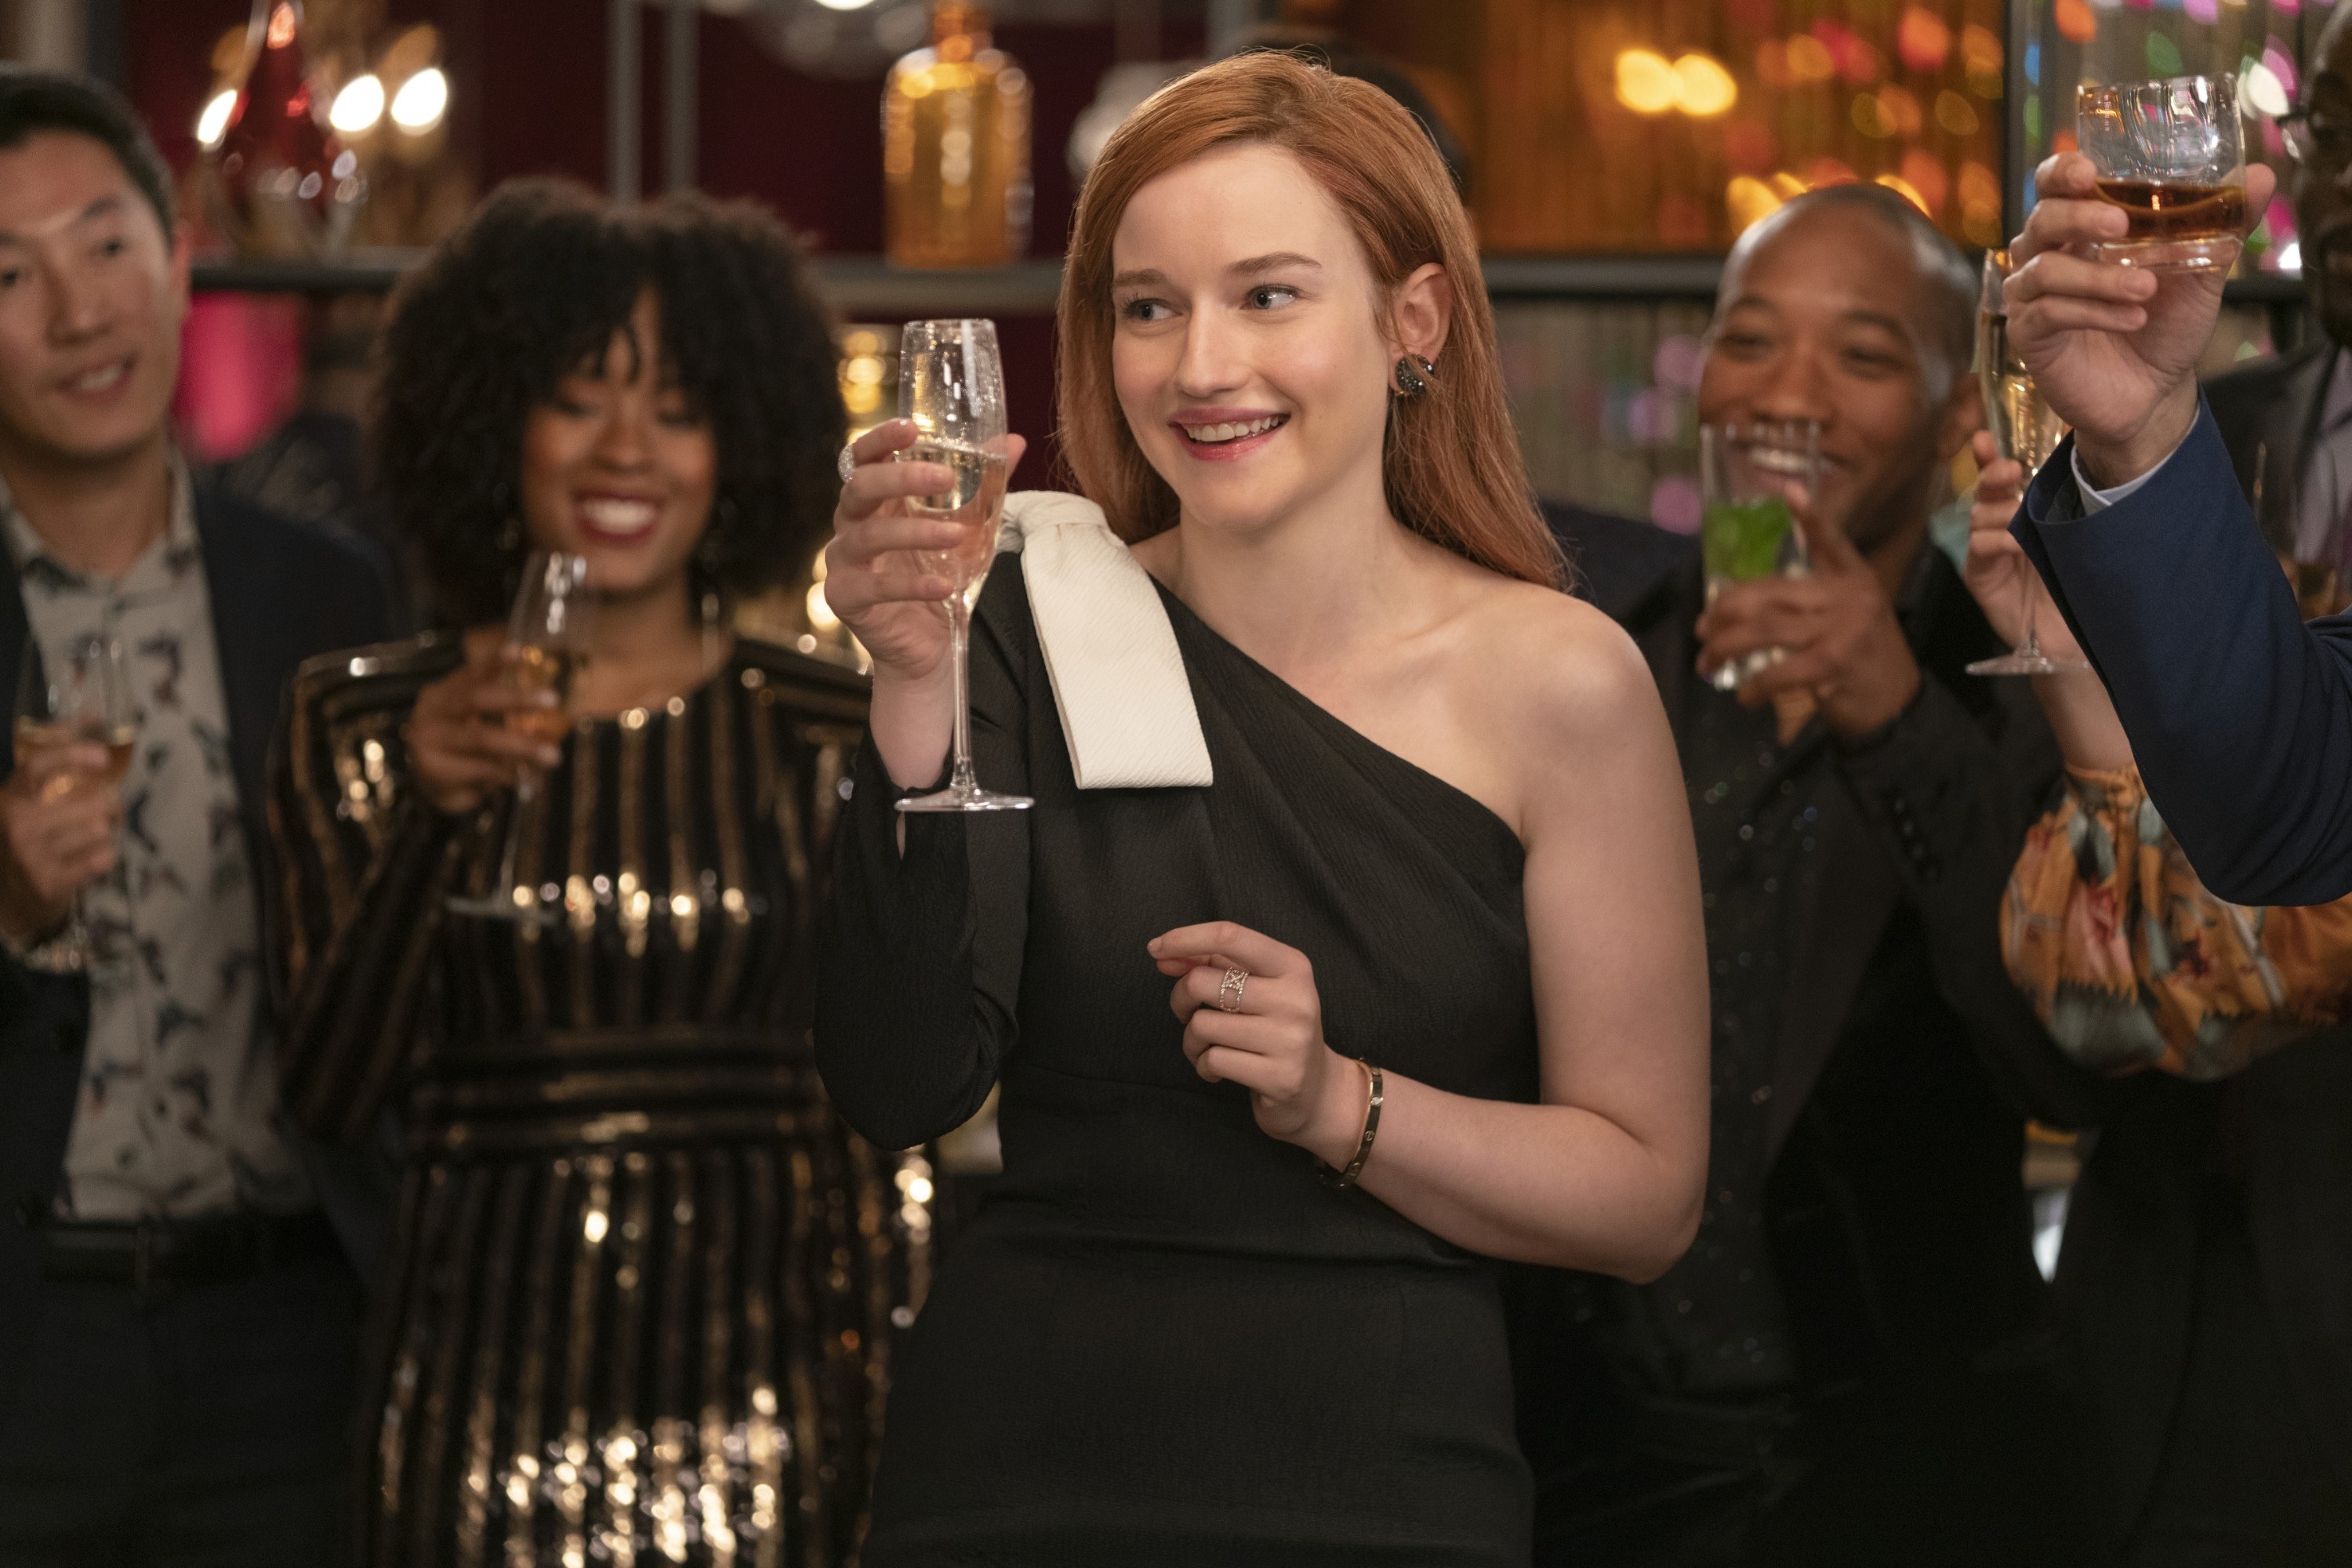 dressed in elegant one-shouldered gown, Anna toasts her champagne with her peers